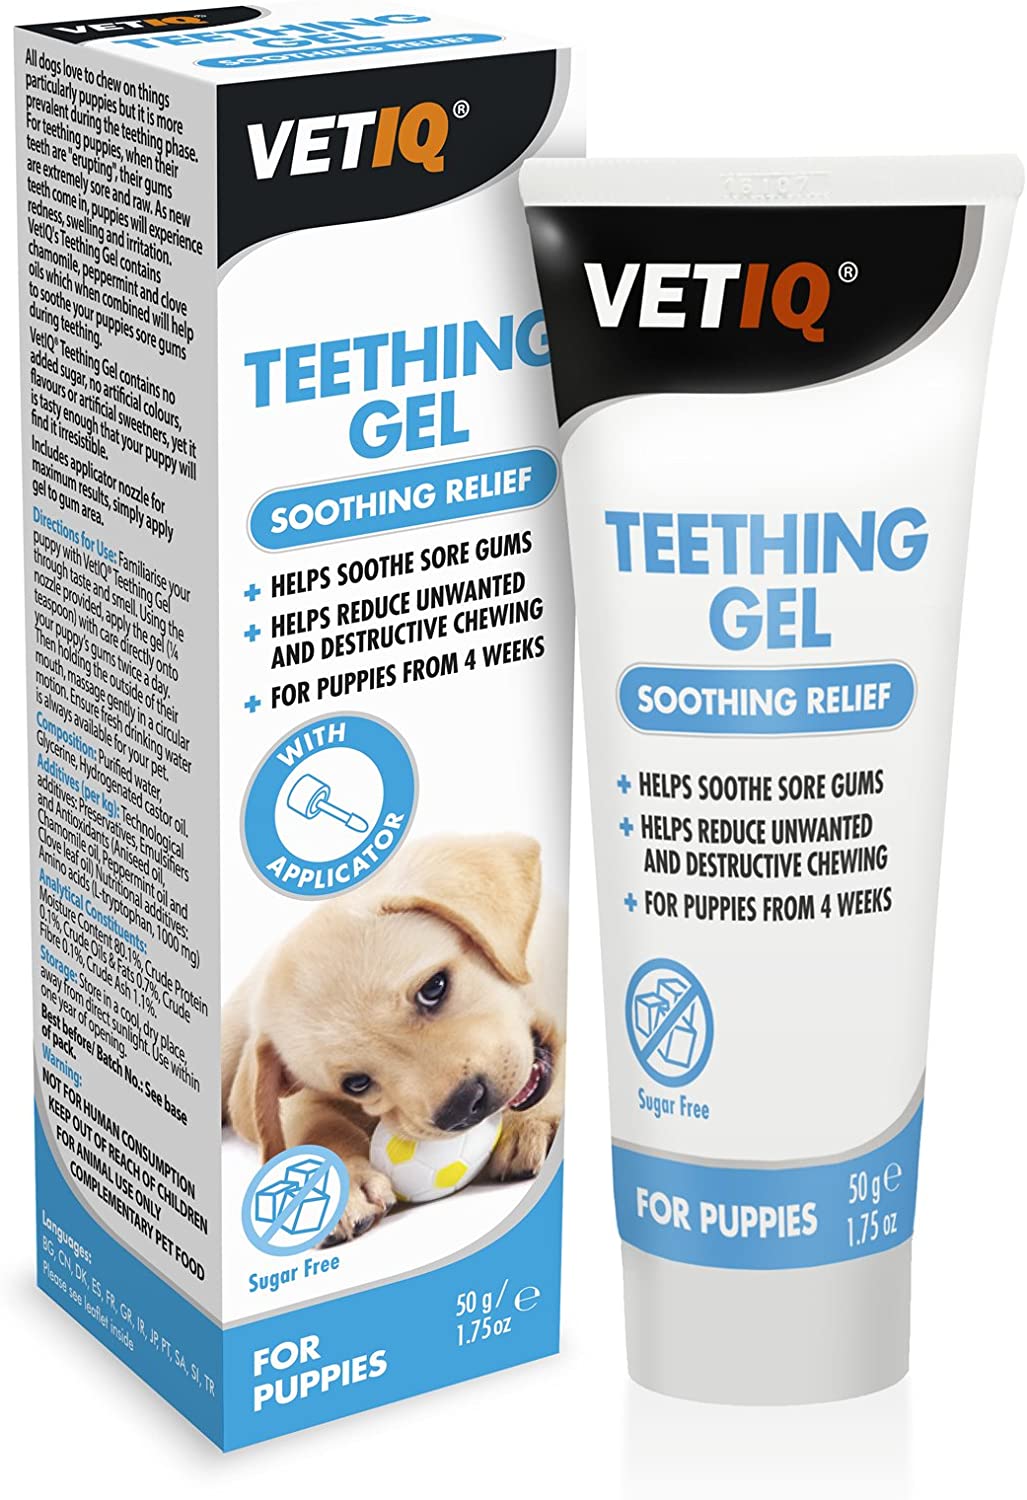 Vet IQ Teething Gel soothing relief for Dogs & Puppies, 50g